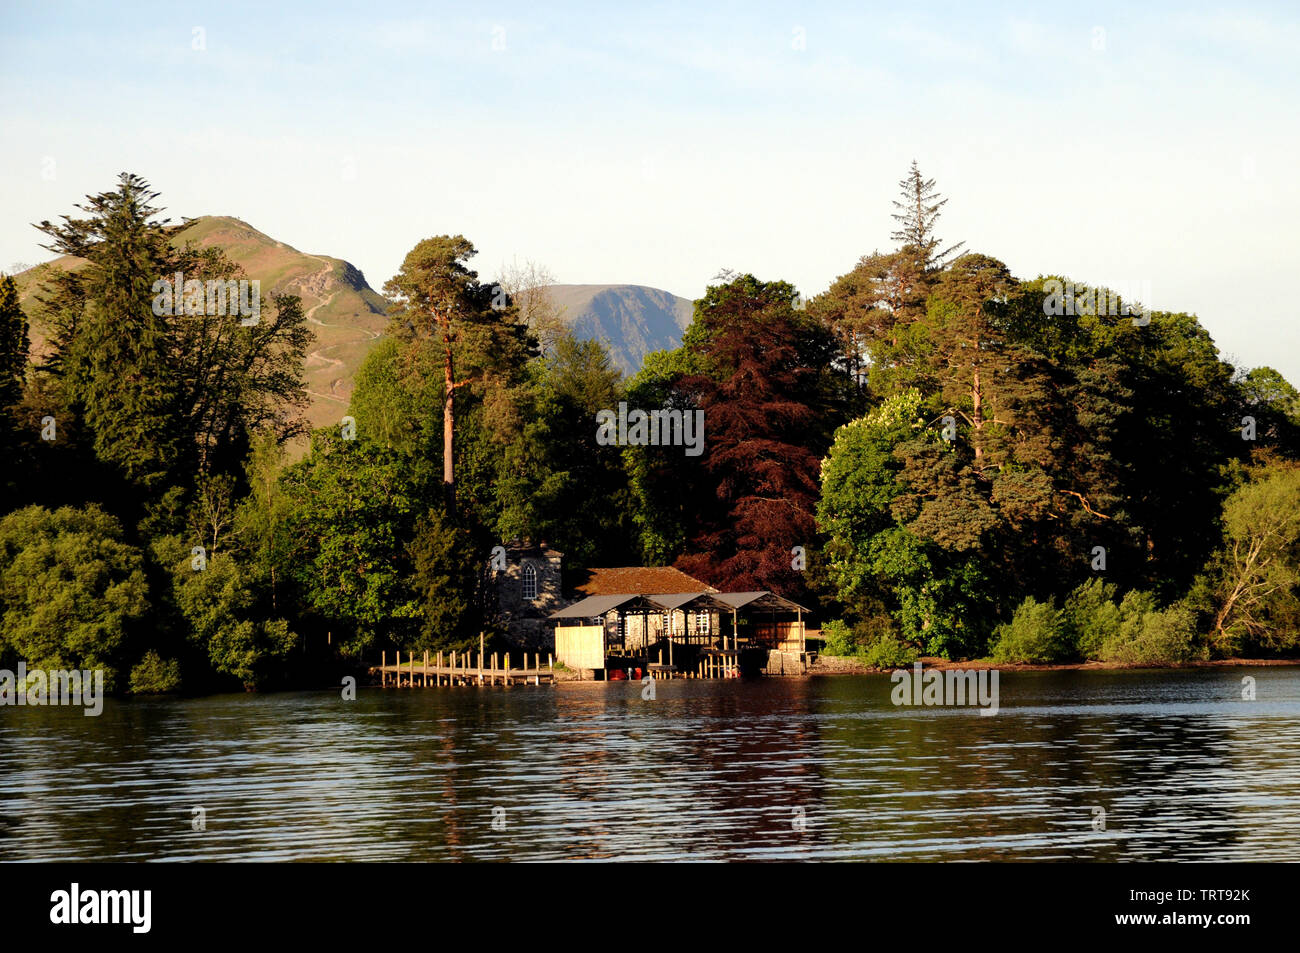 Boathouse nestles on Derwent Isle, an island as its name implies on Derwentwater, Keswick, in the English Lake District Stock Photo